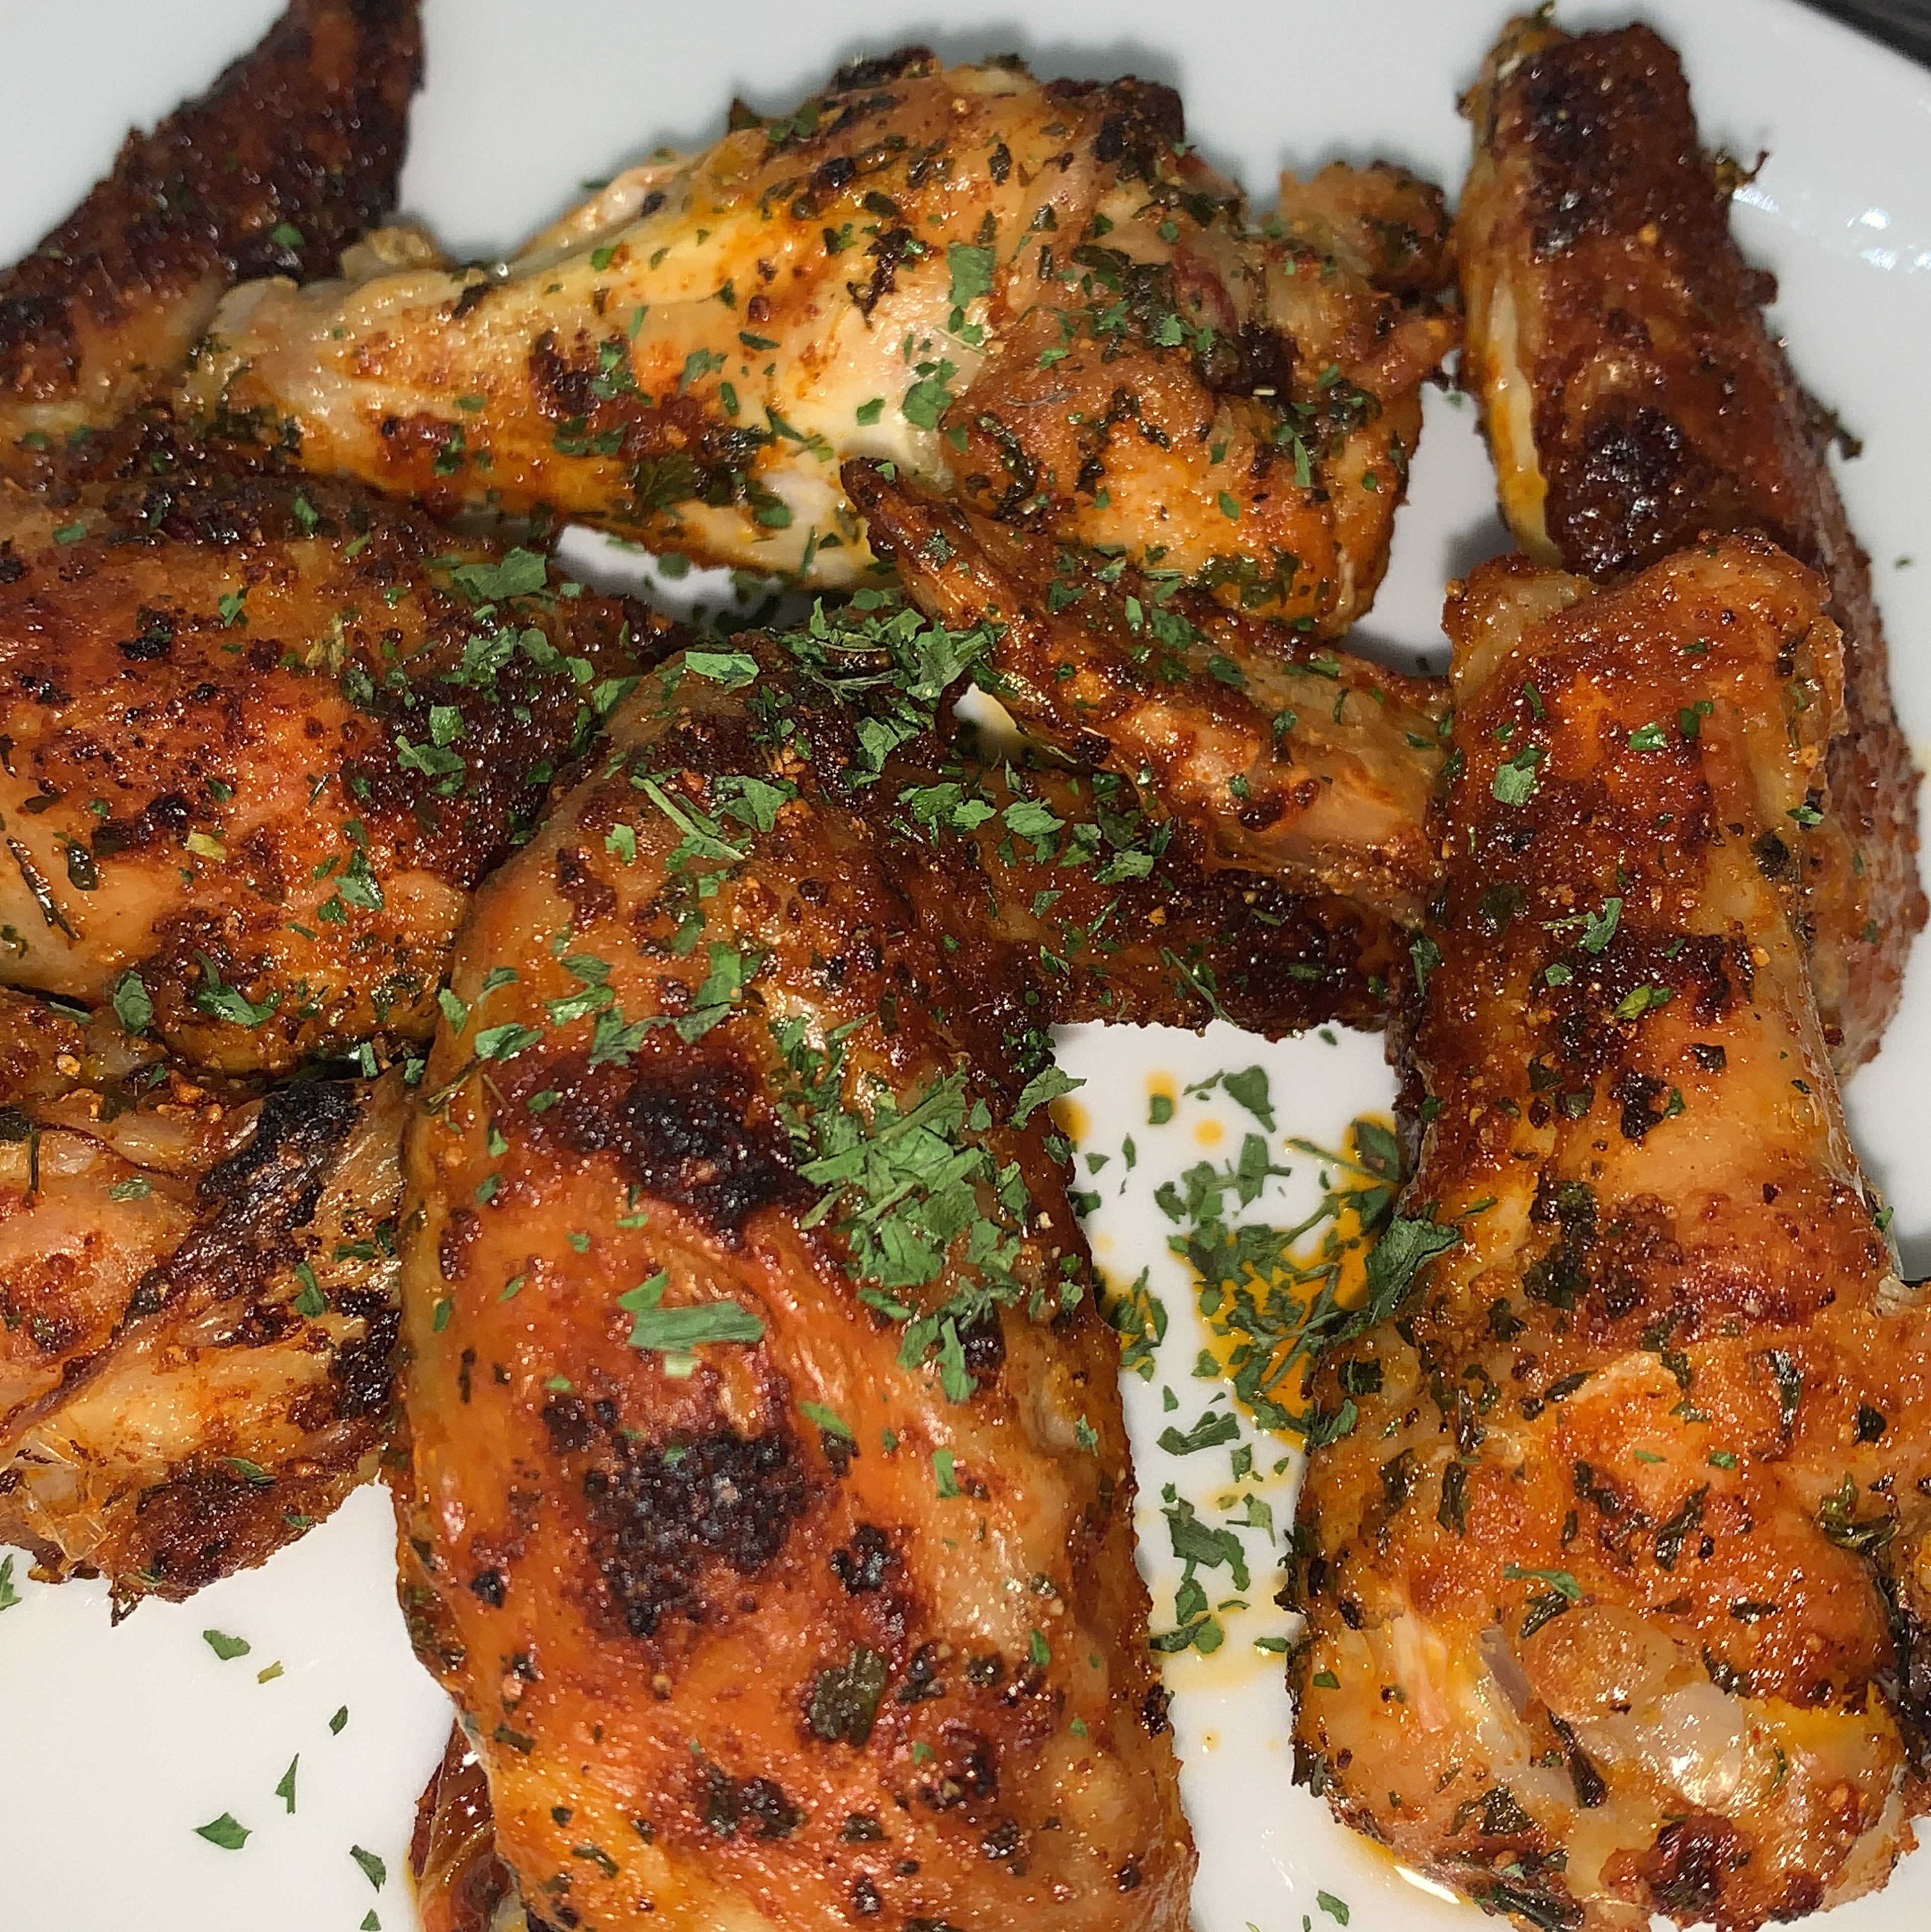 After around 40 minutes , your wings are ready! Throw some more parsley on top and you’re good to go!